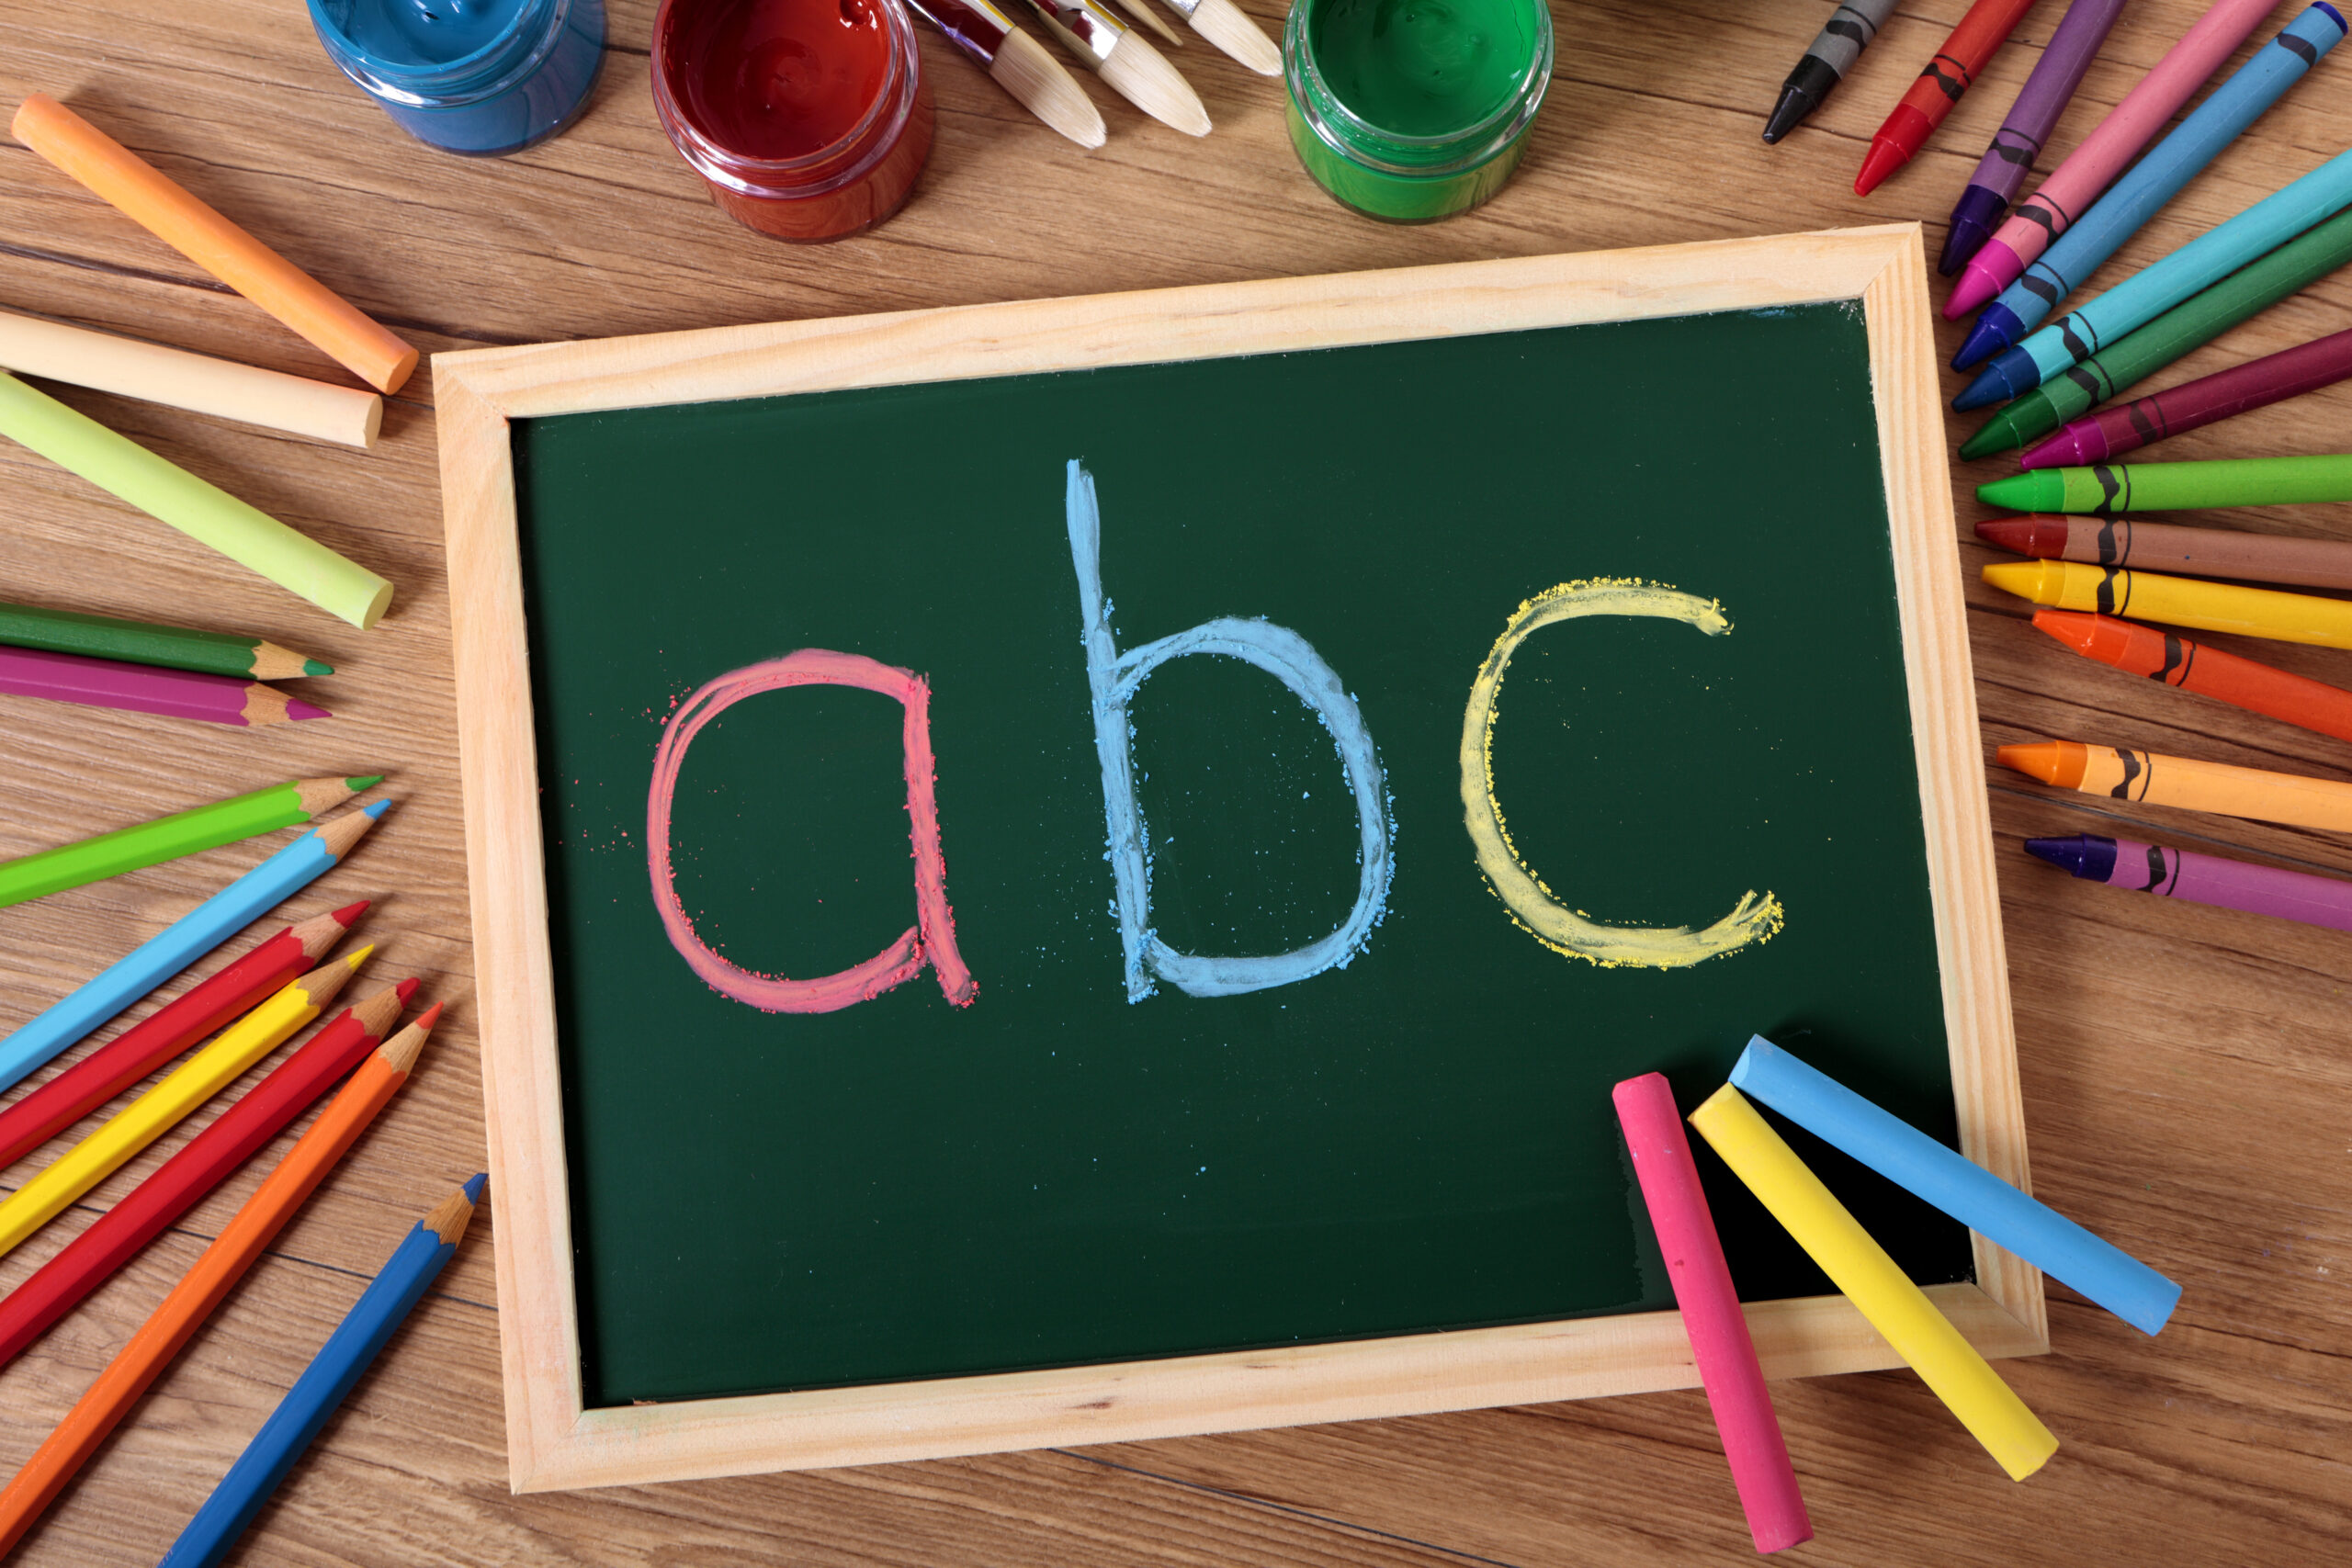 Image of chalkboard with the letters A B C on it